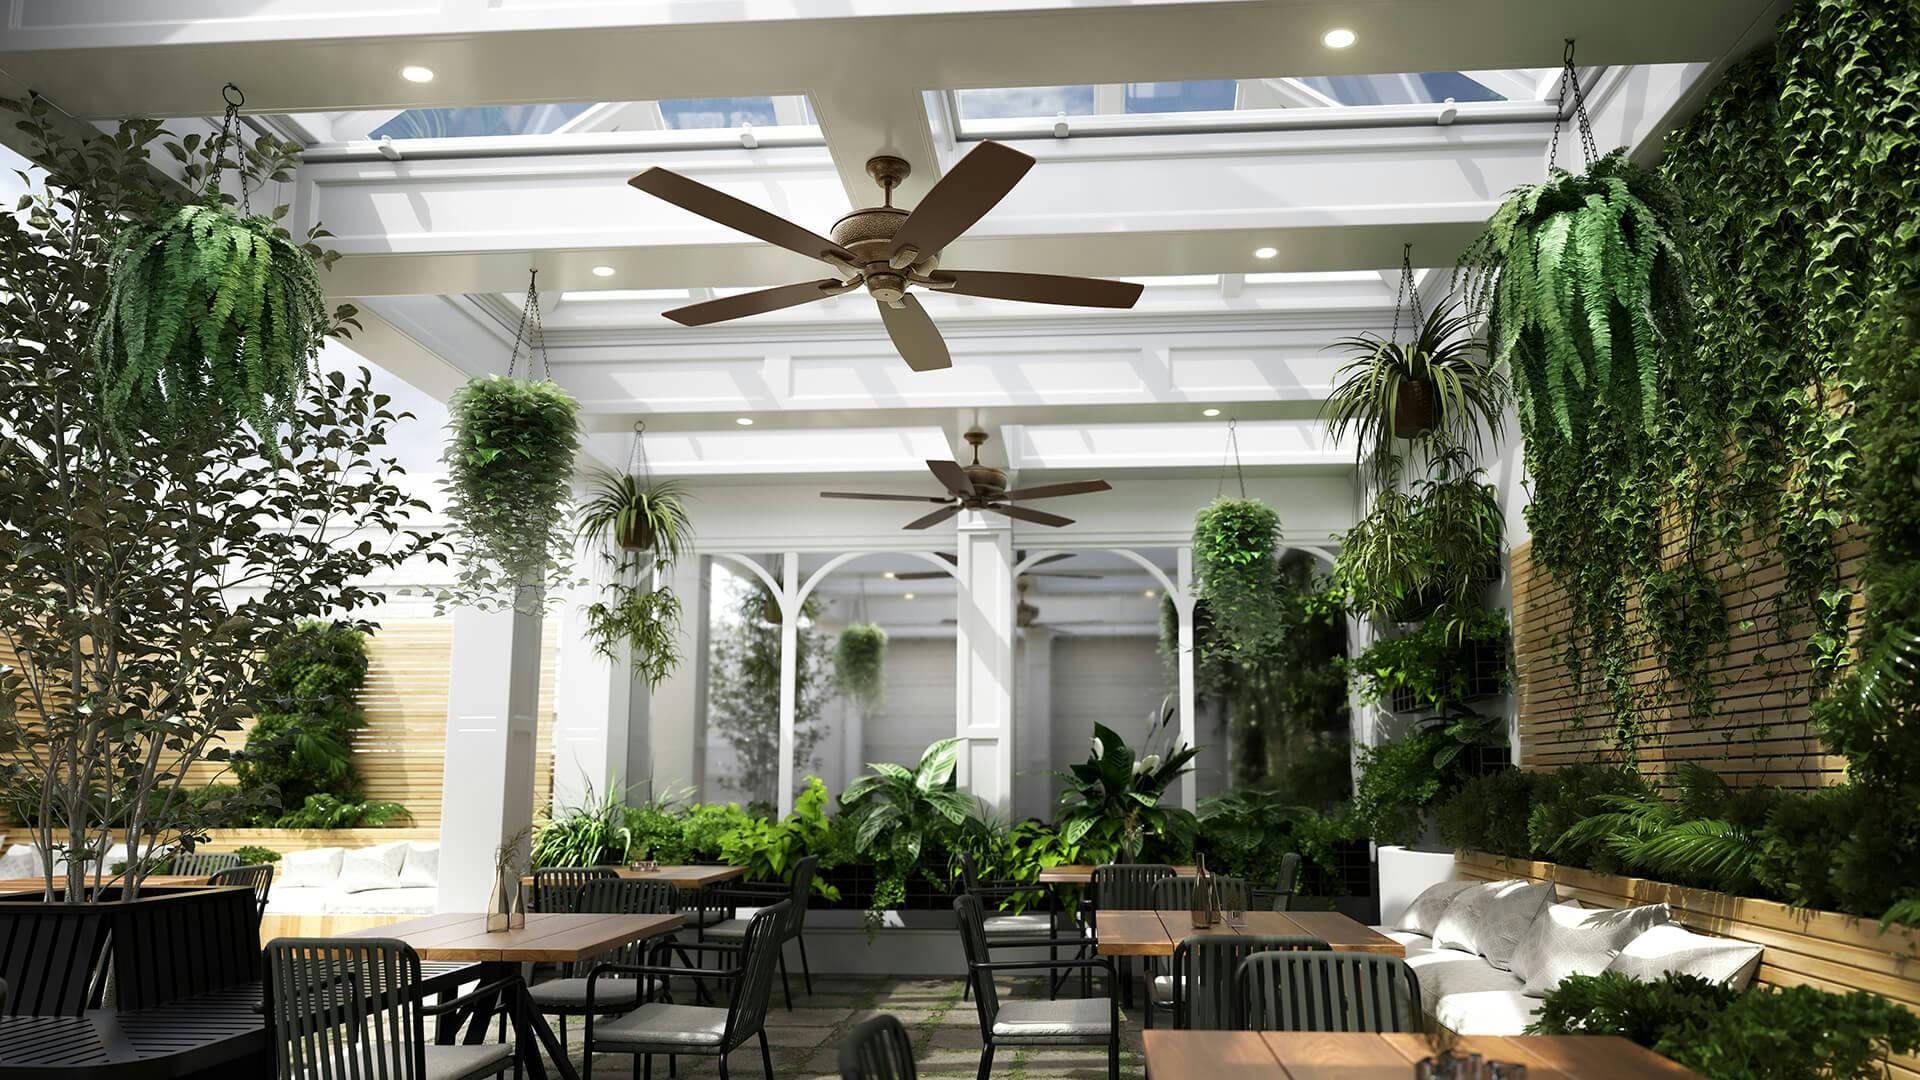 Partially outdoor restaurant with glass ceiling and greenery hanging from the walls, featuring ceiling lights and fans